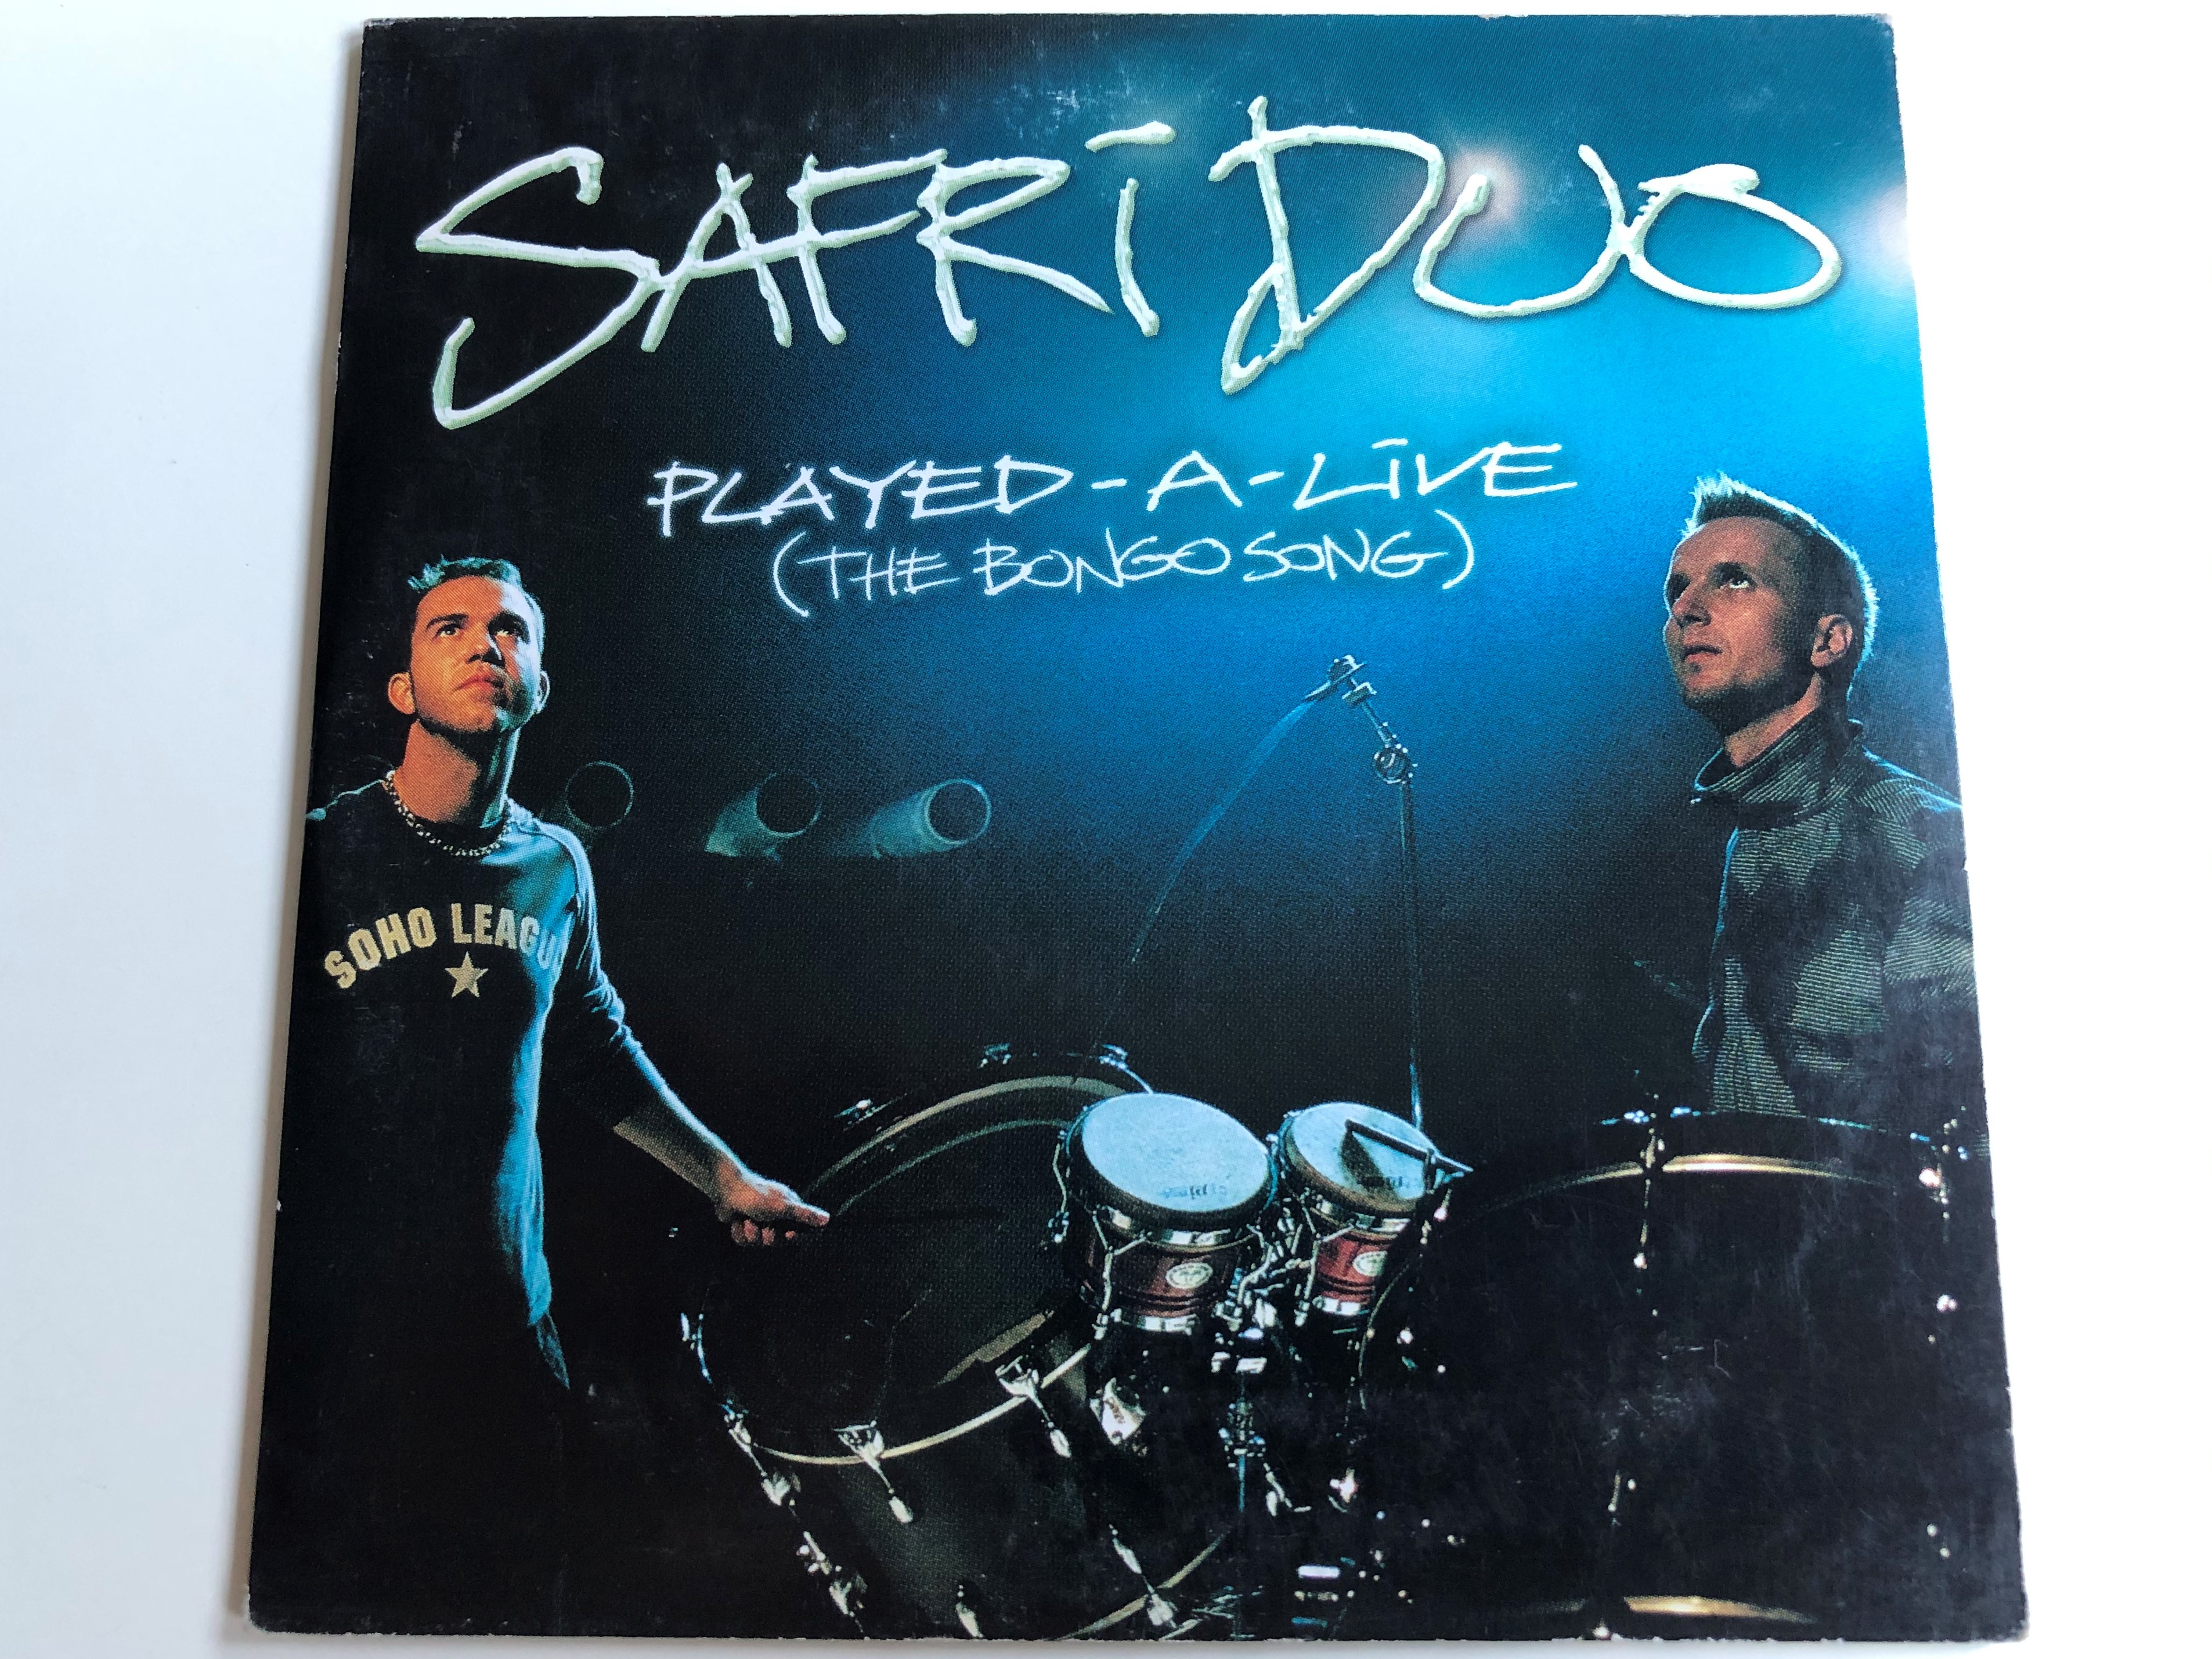 safri-duo-played-a-live-the-bongo-song-universal-audio-cd-2000-158-541-2-1-.jpg